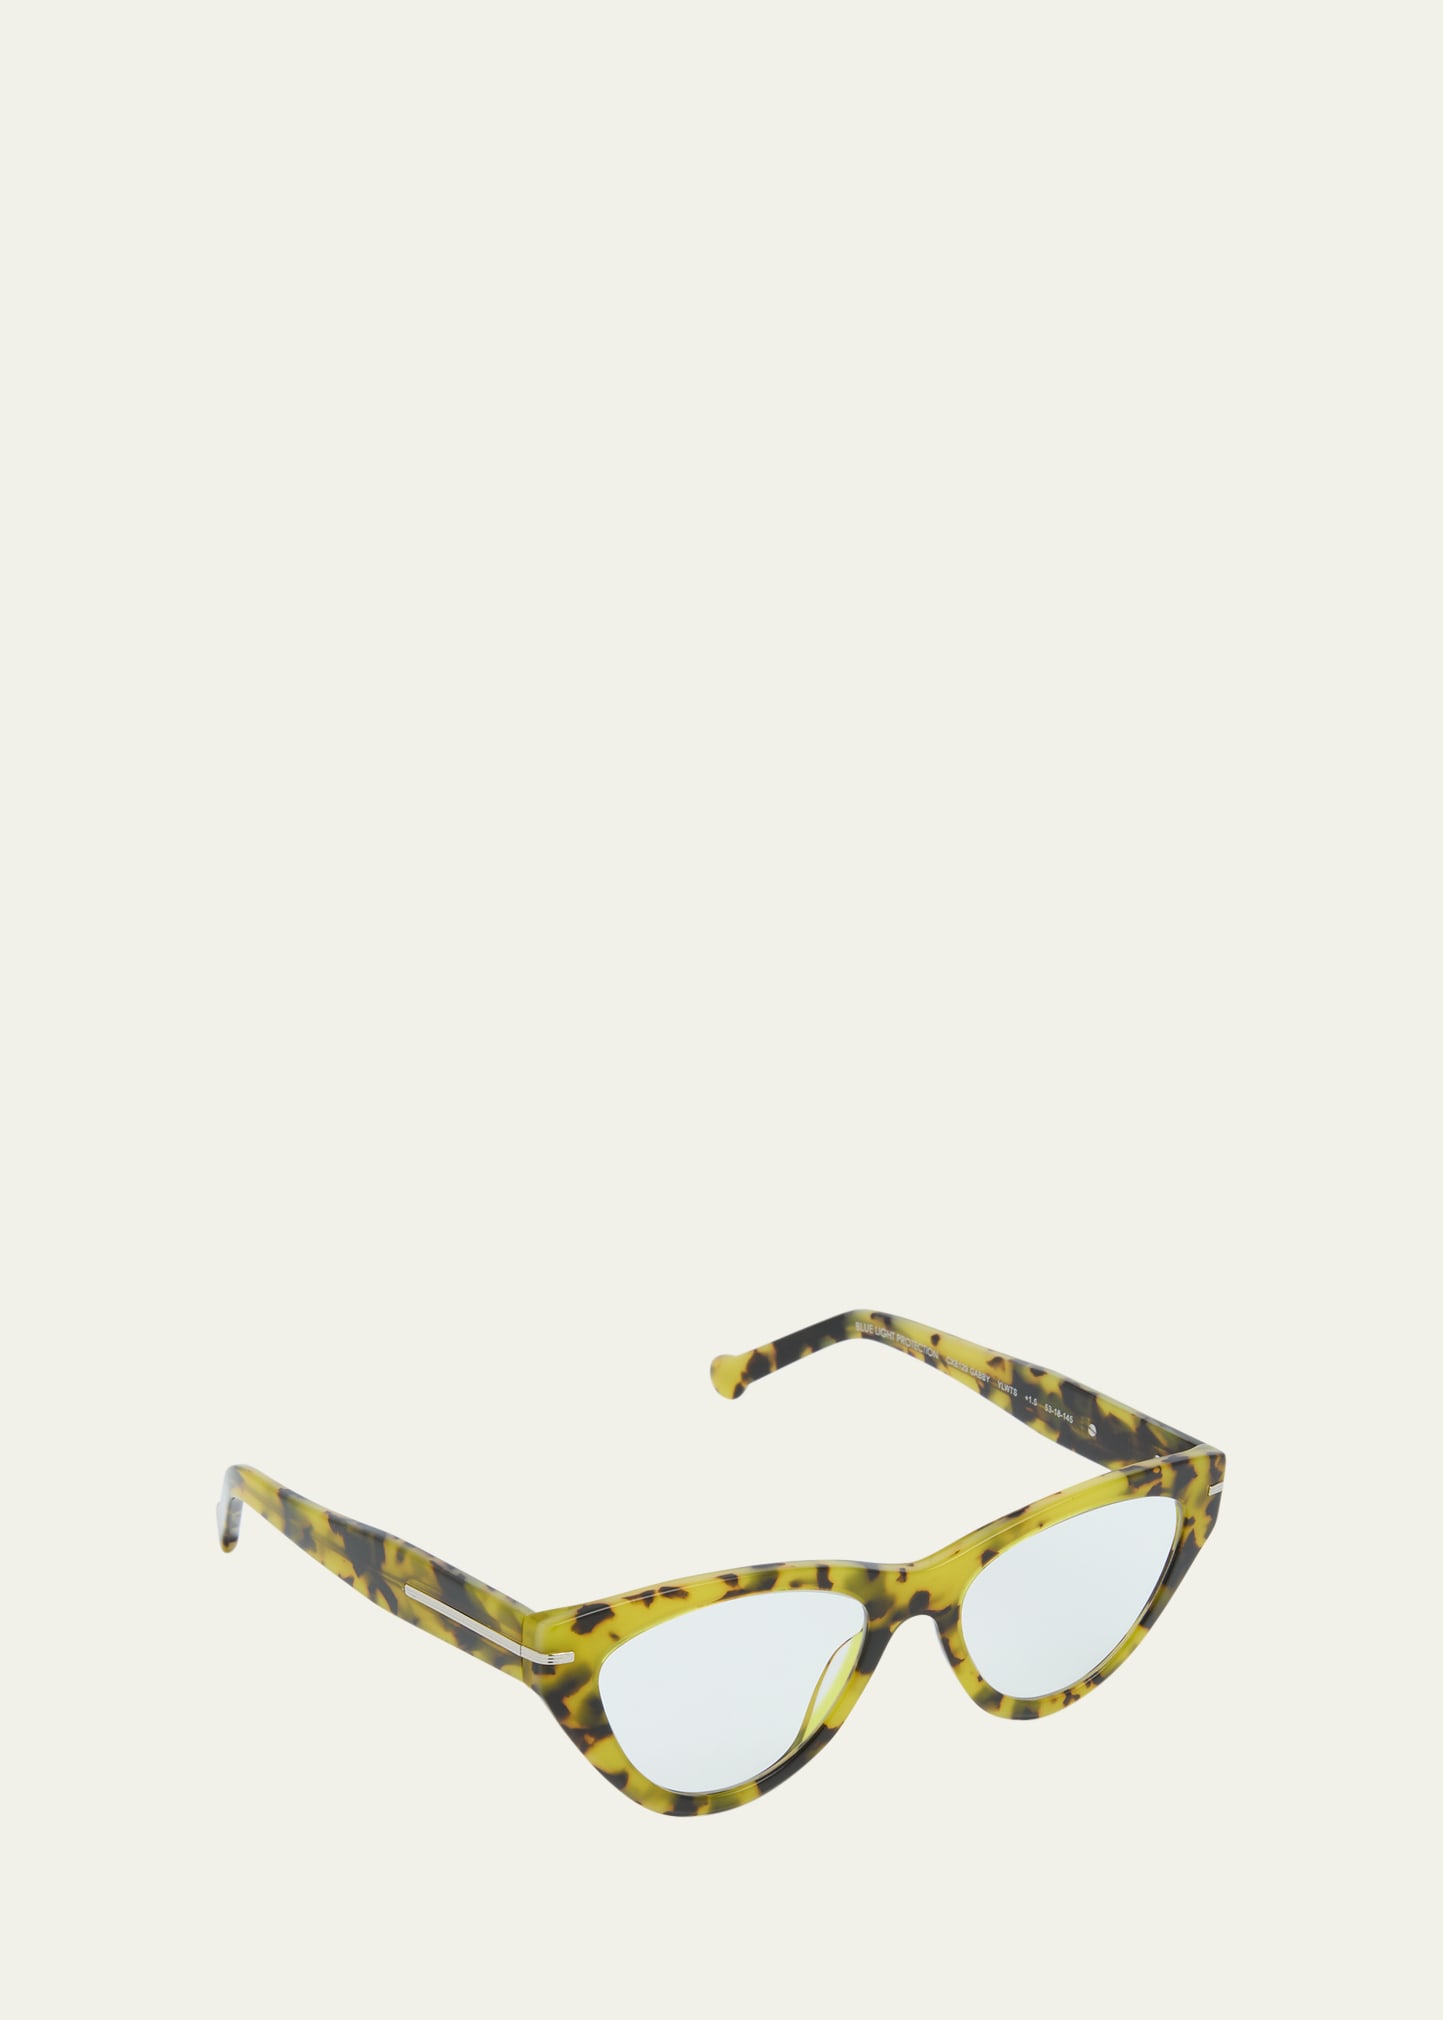 Colors In Optics Cxb129 Ylwts Blue Blocking Acetate Cat-eye Glasses In Yellow Tortoise